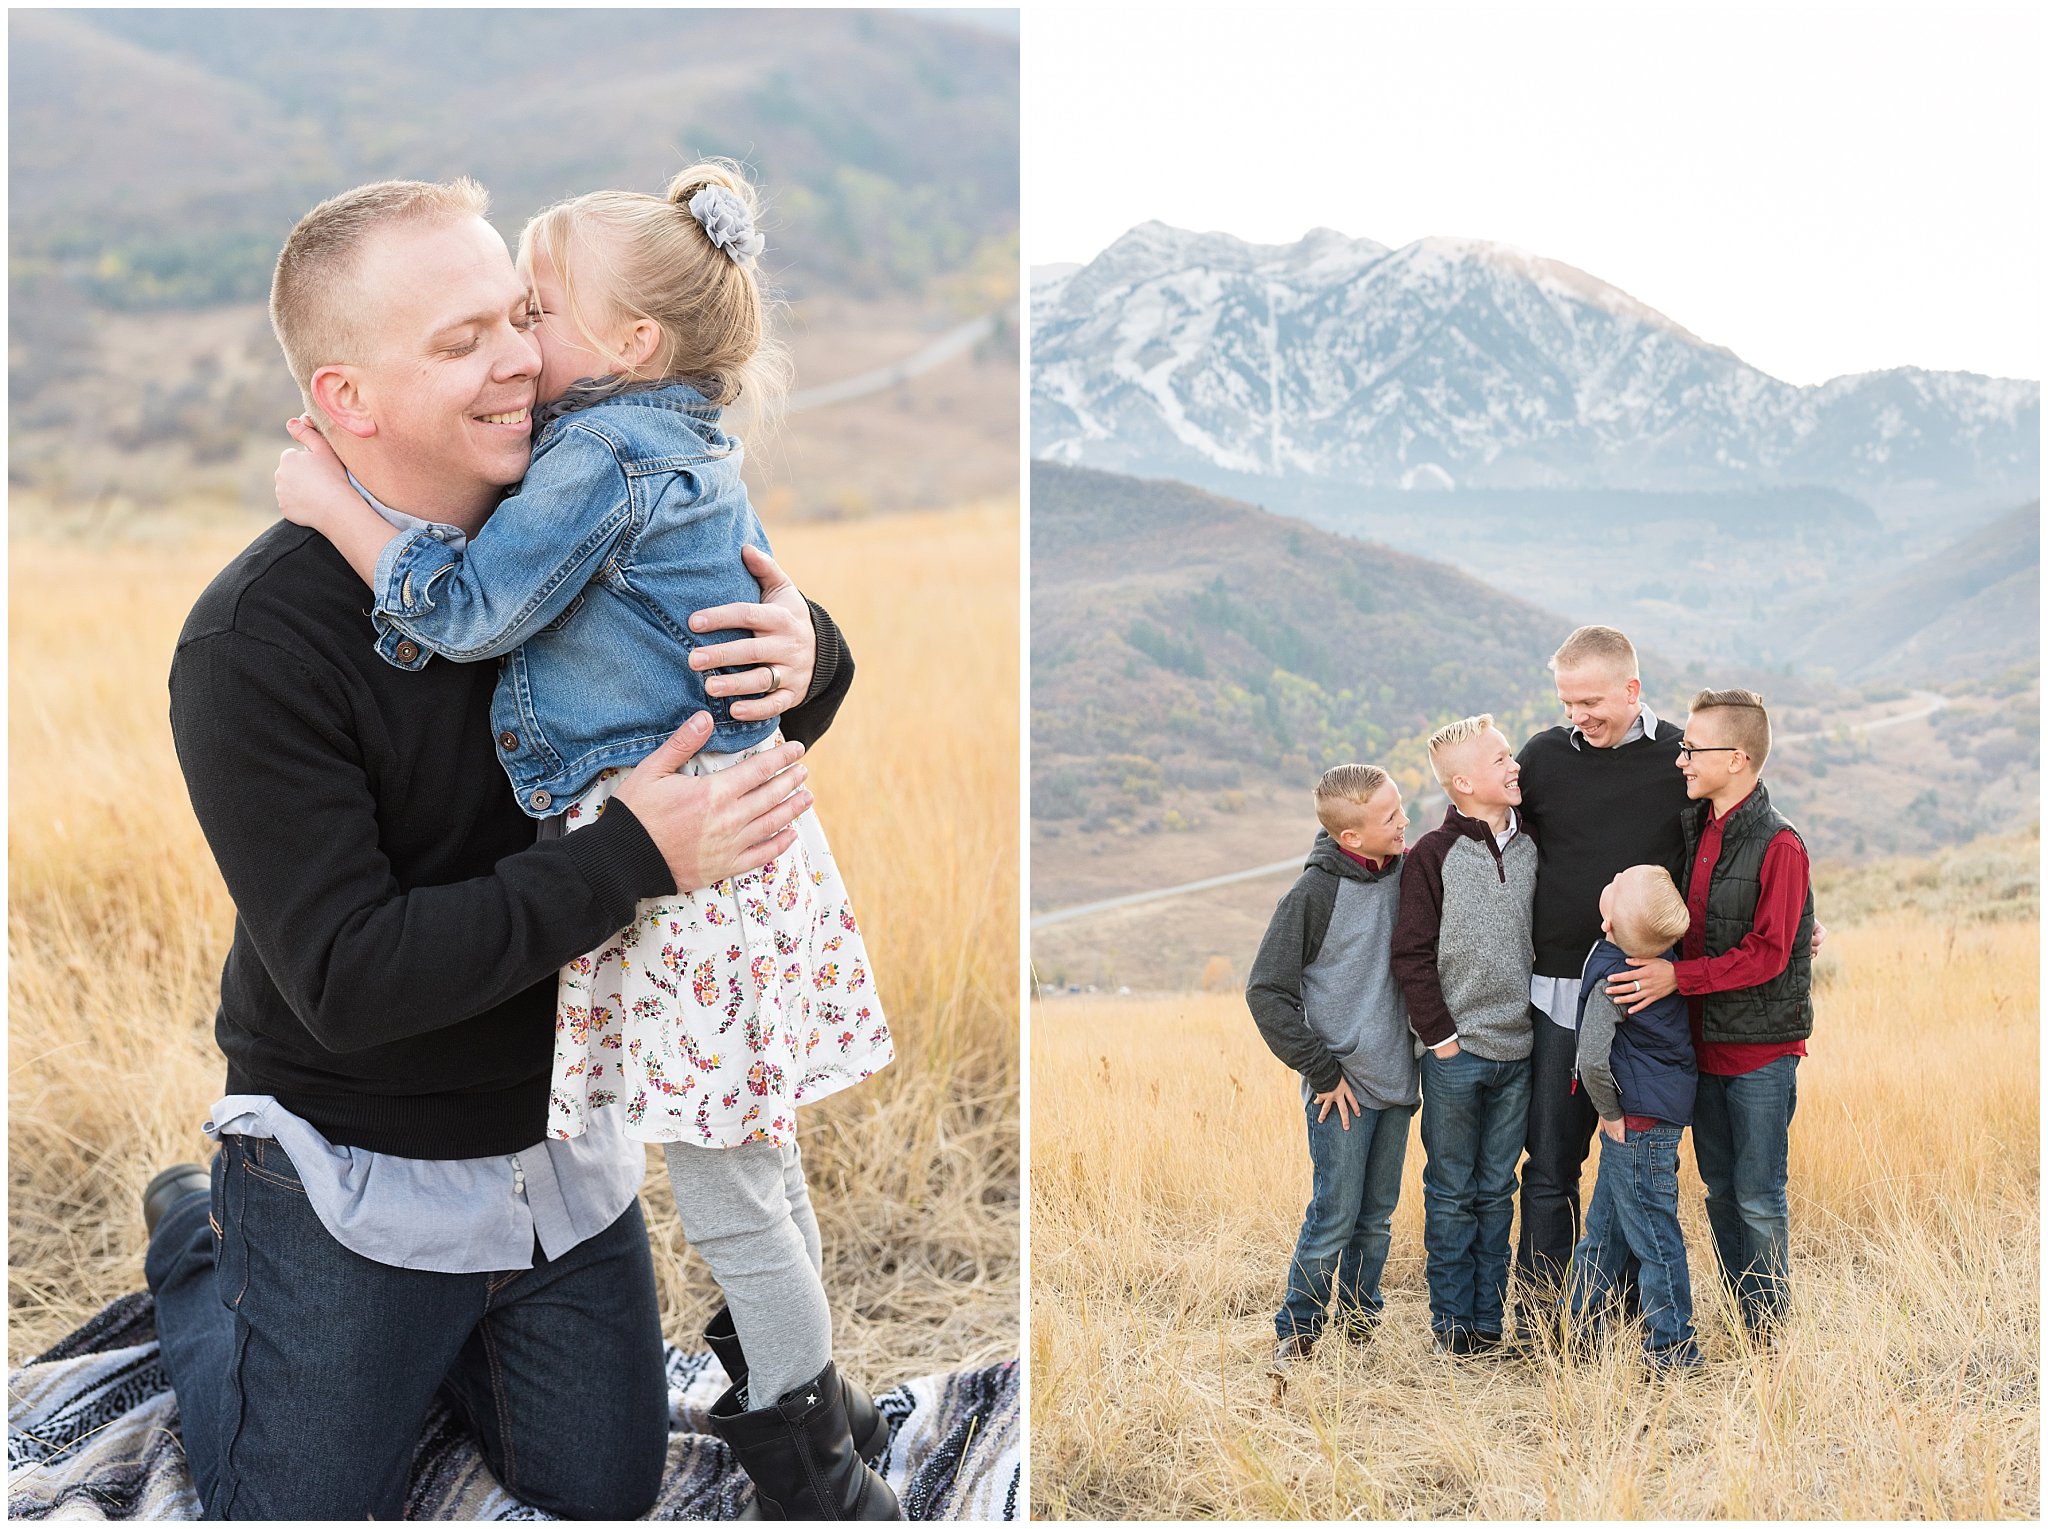 Candid pictures of dad with his kids | Fall Family Pictures in the Mountains | Snowbasin, Utah | Jessie and Dallin Photography